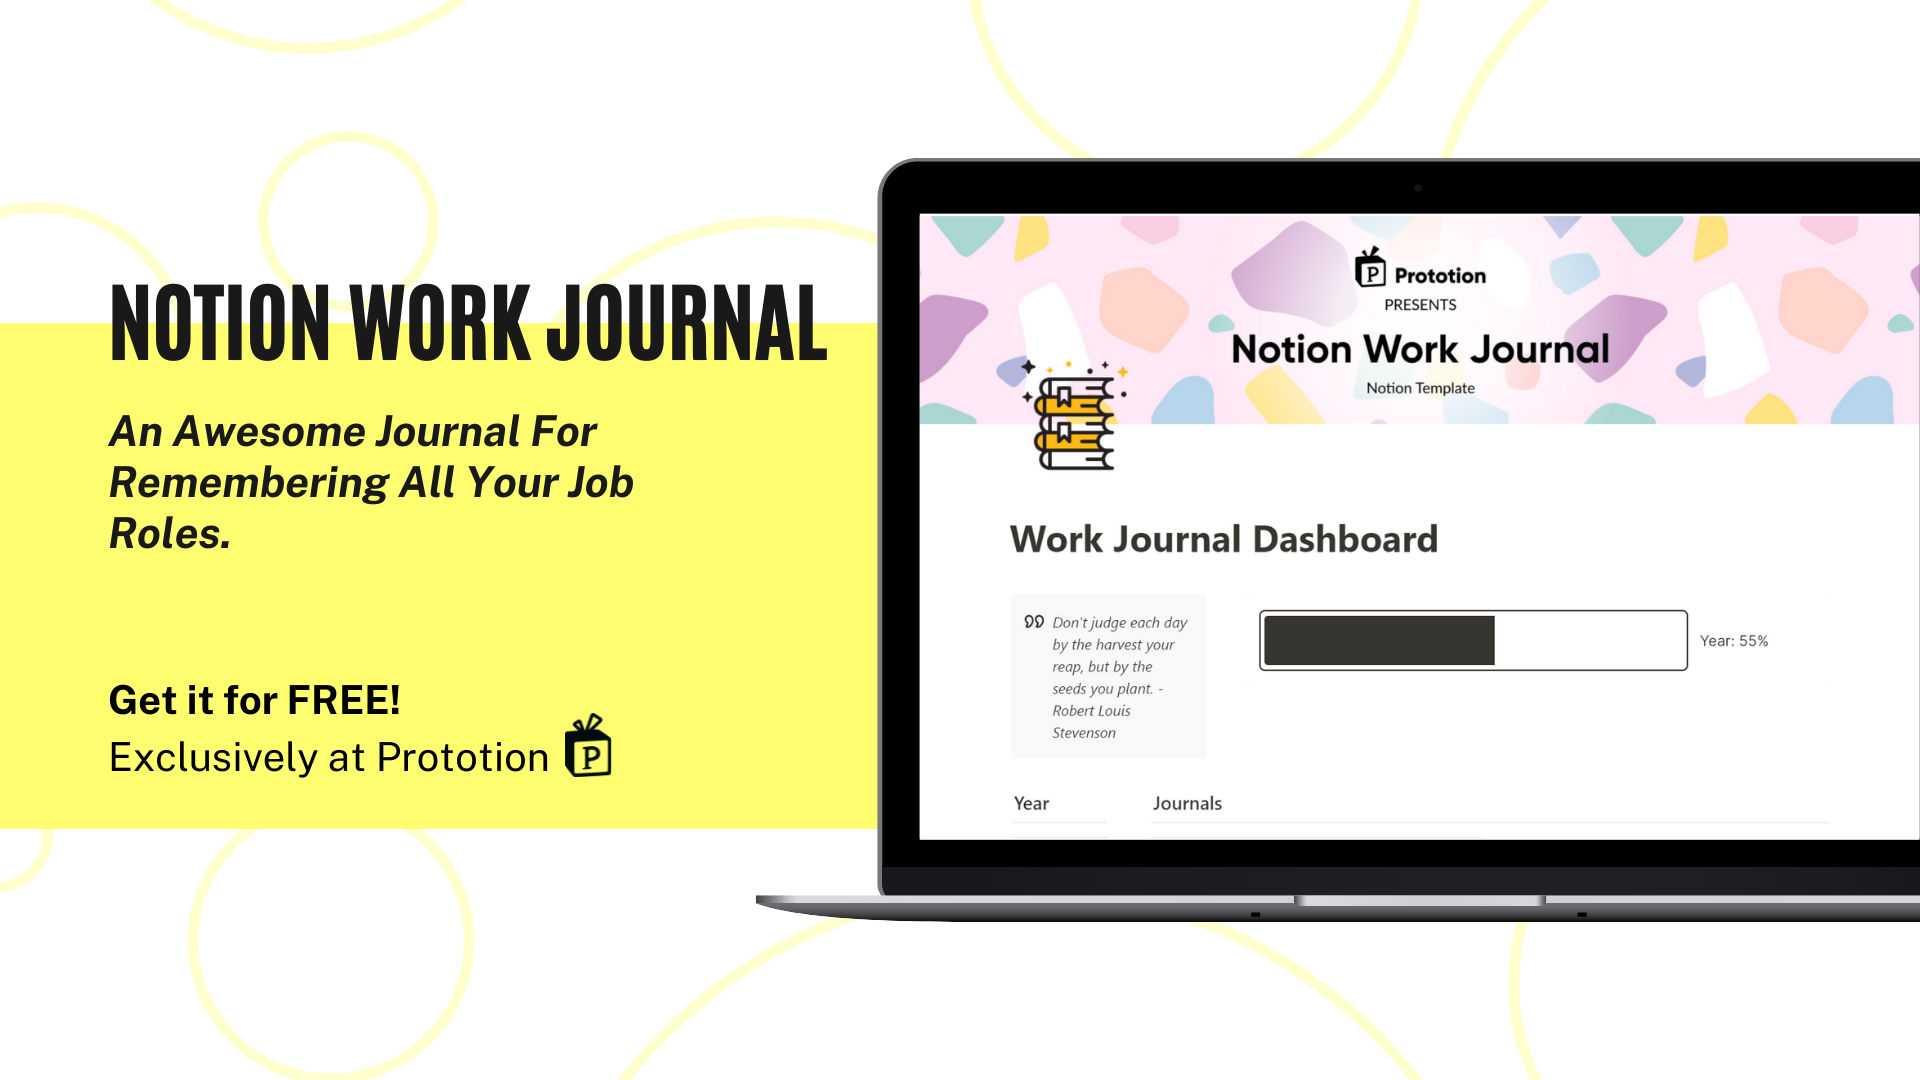 Work Journal Dashboard | Free Notion Template| Prototion